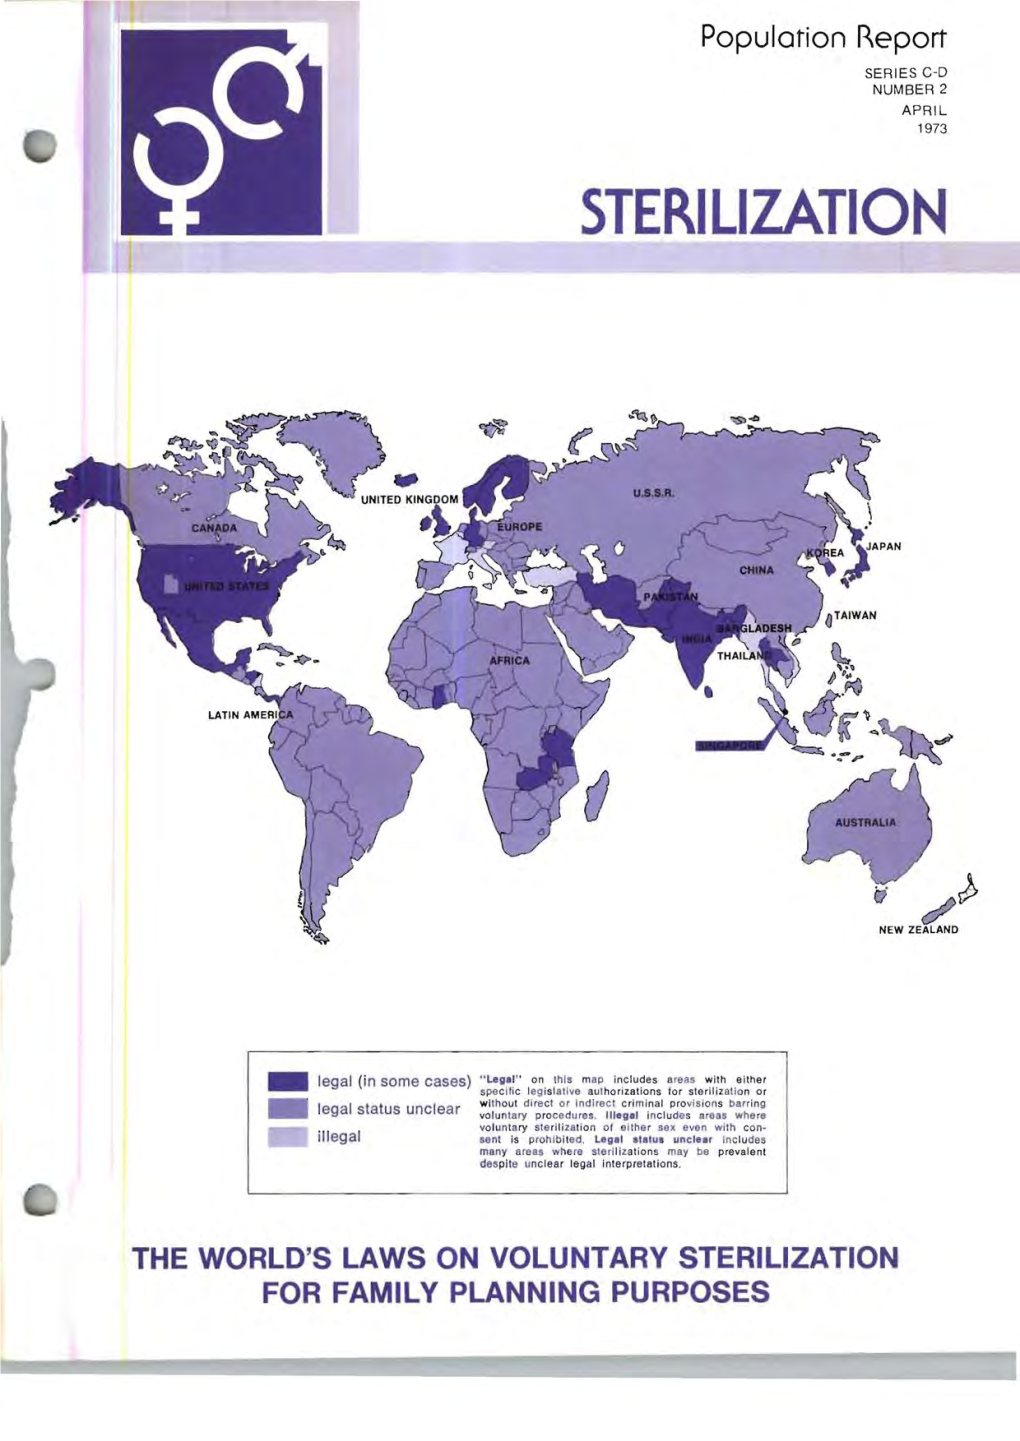 Population Reports. Series C-D, Number 2: Sterilization. the World's